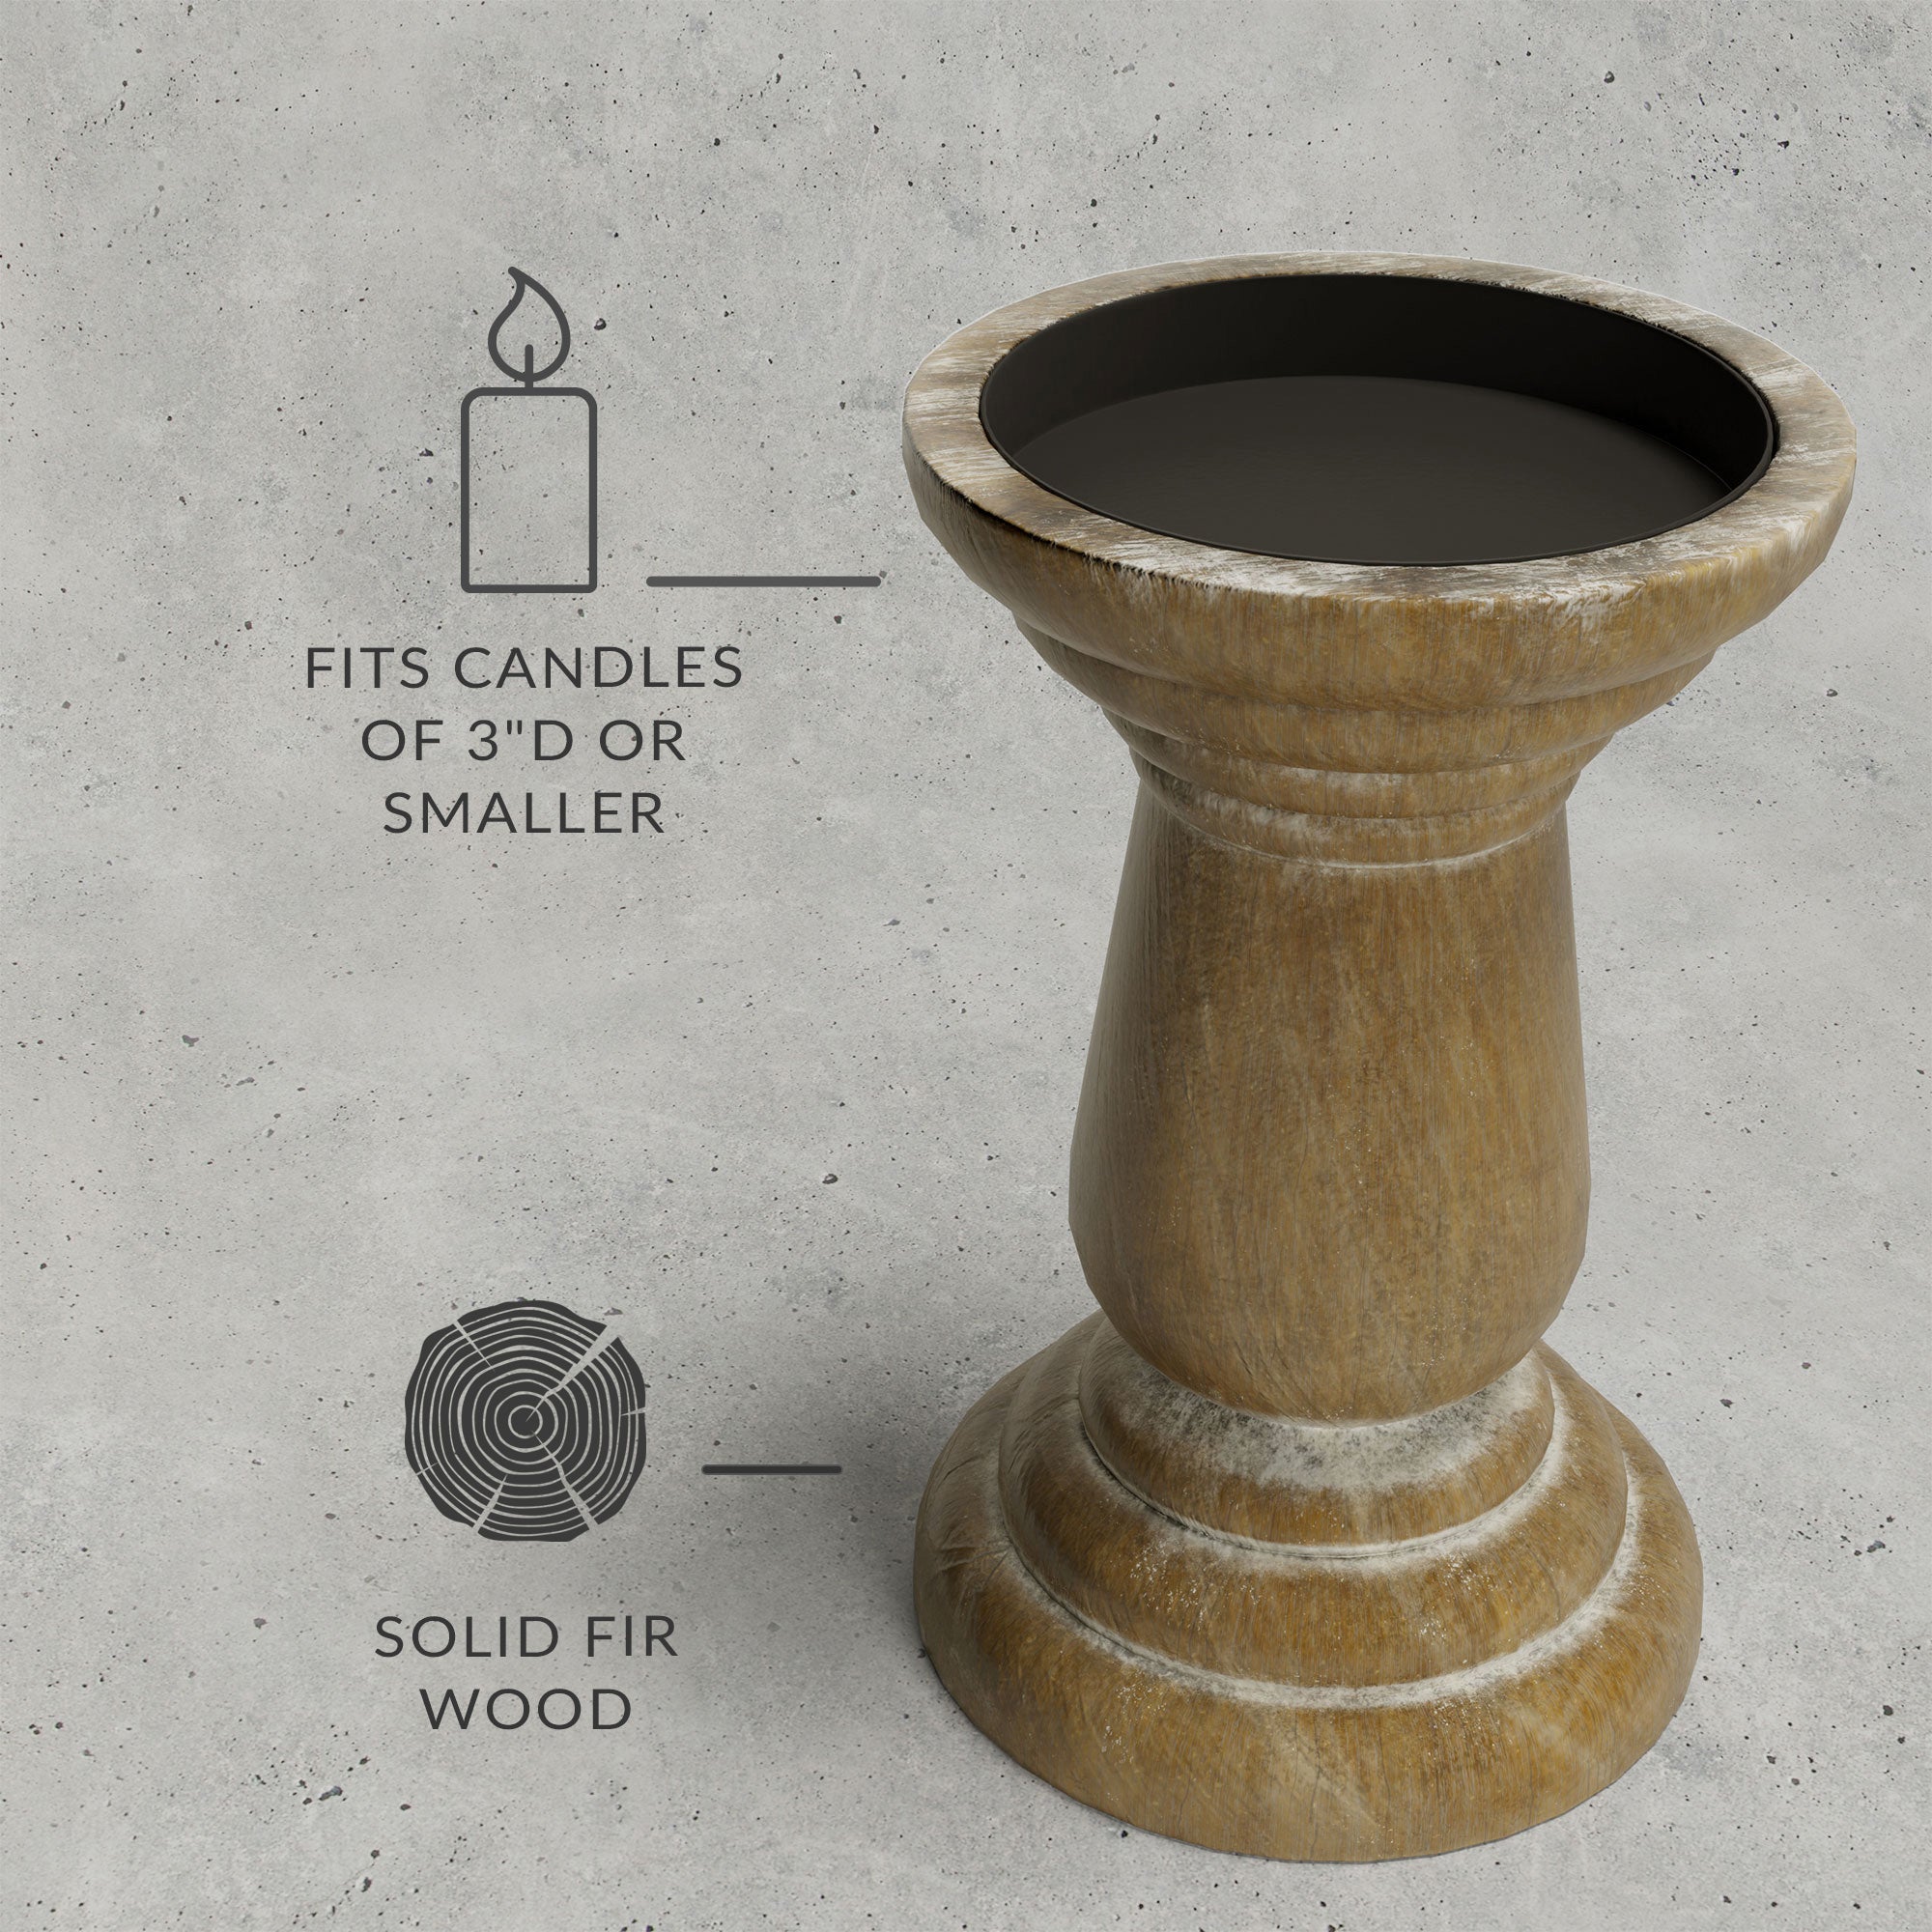 Floor Candle Holders Tall Set of 2, Candle Holders for Pillar Candles, Wood  Handcrafted Rustic Candle Holder, Large Decorative Candles for Wedding